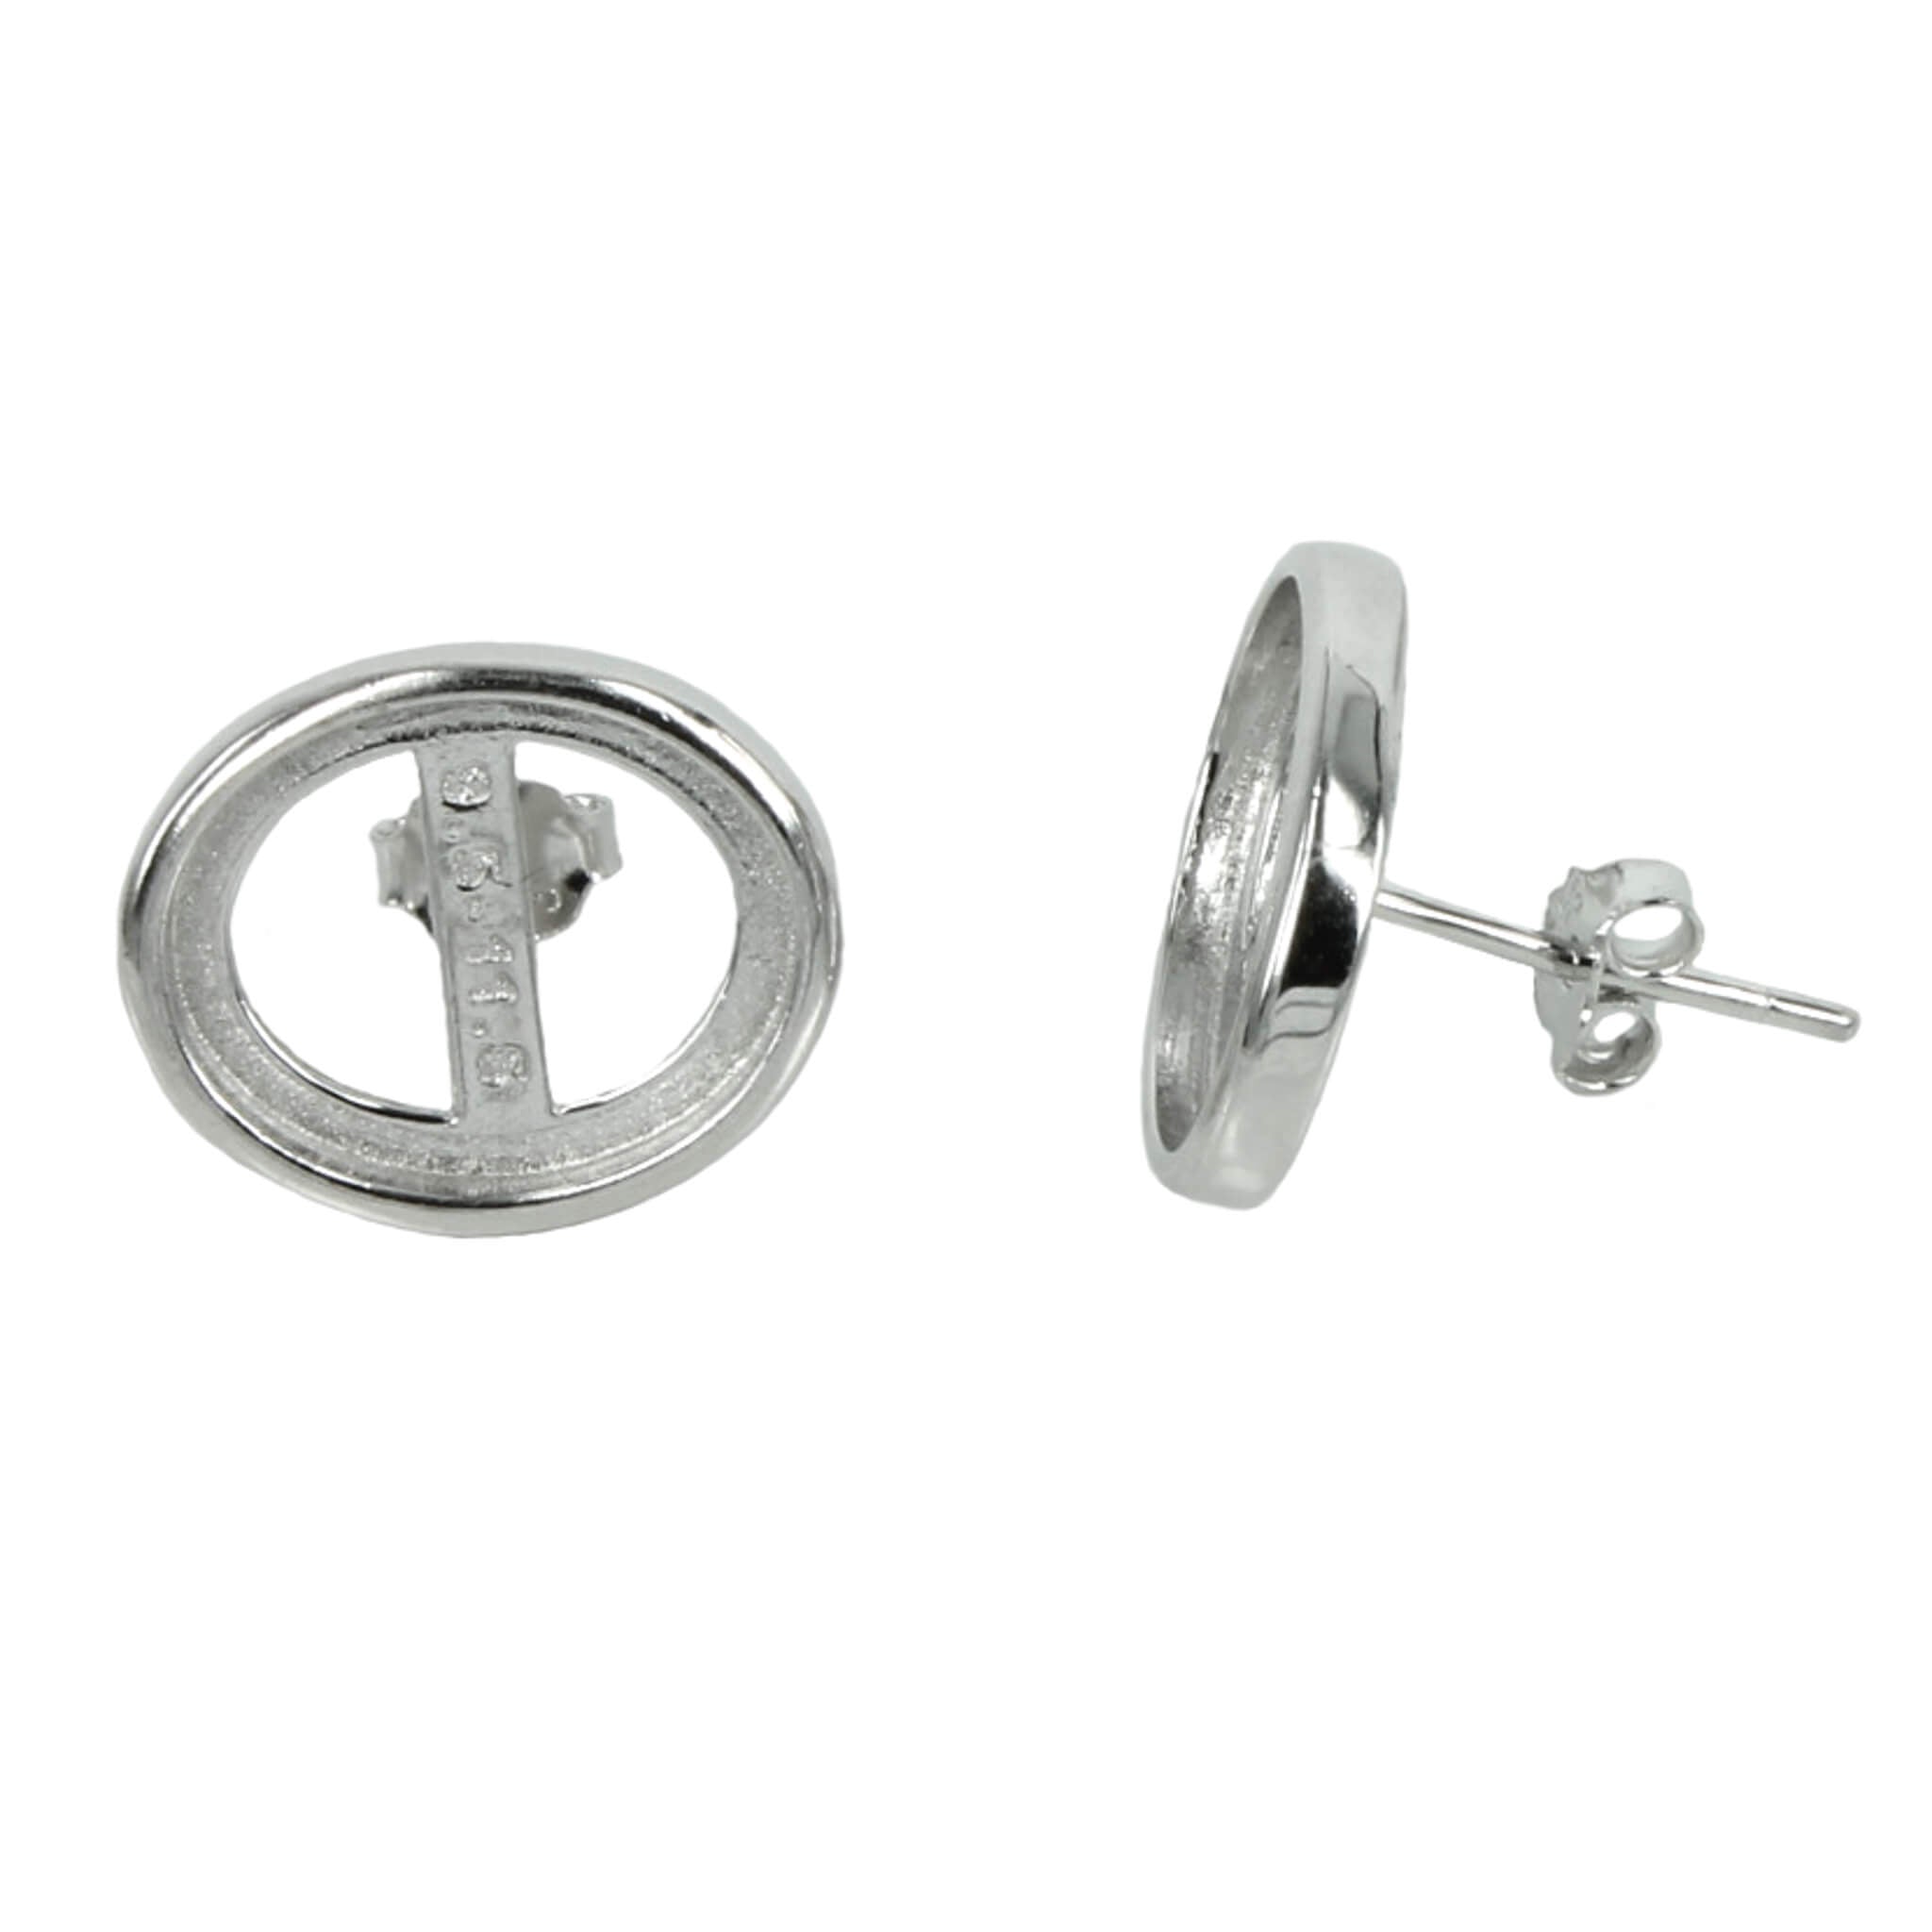 Ear Studs Earrings Settings with Oval Bezel Mounting in Sterling Silver - Various Sizes